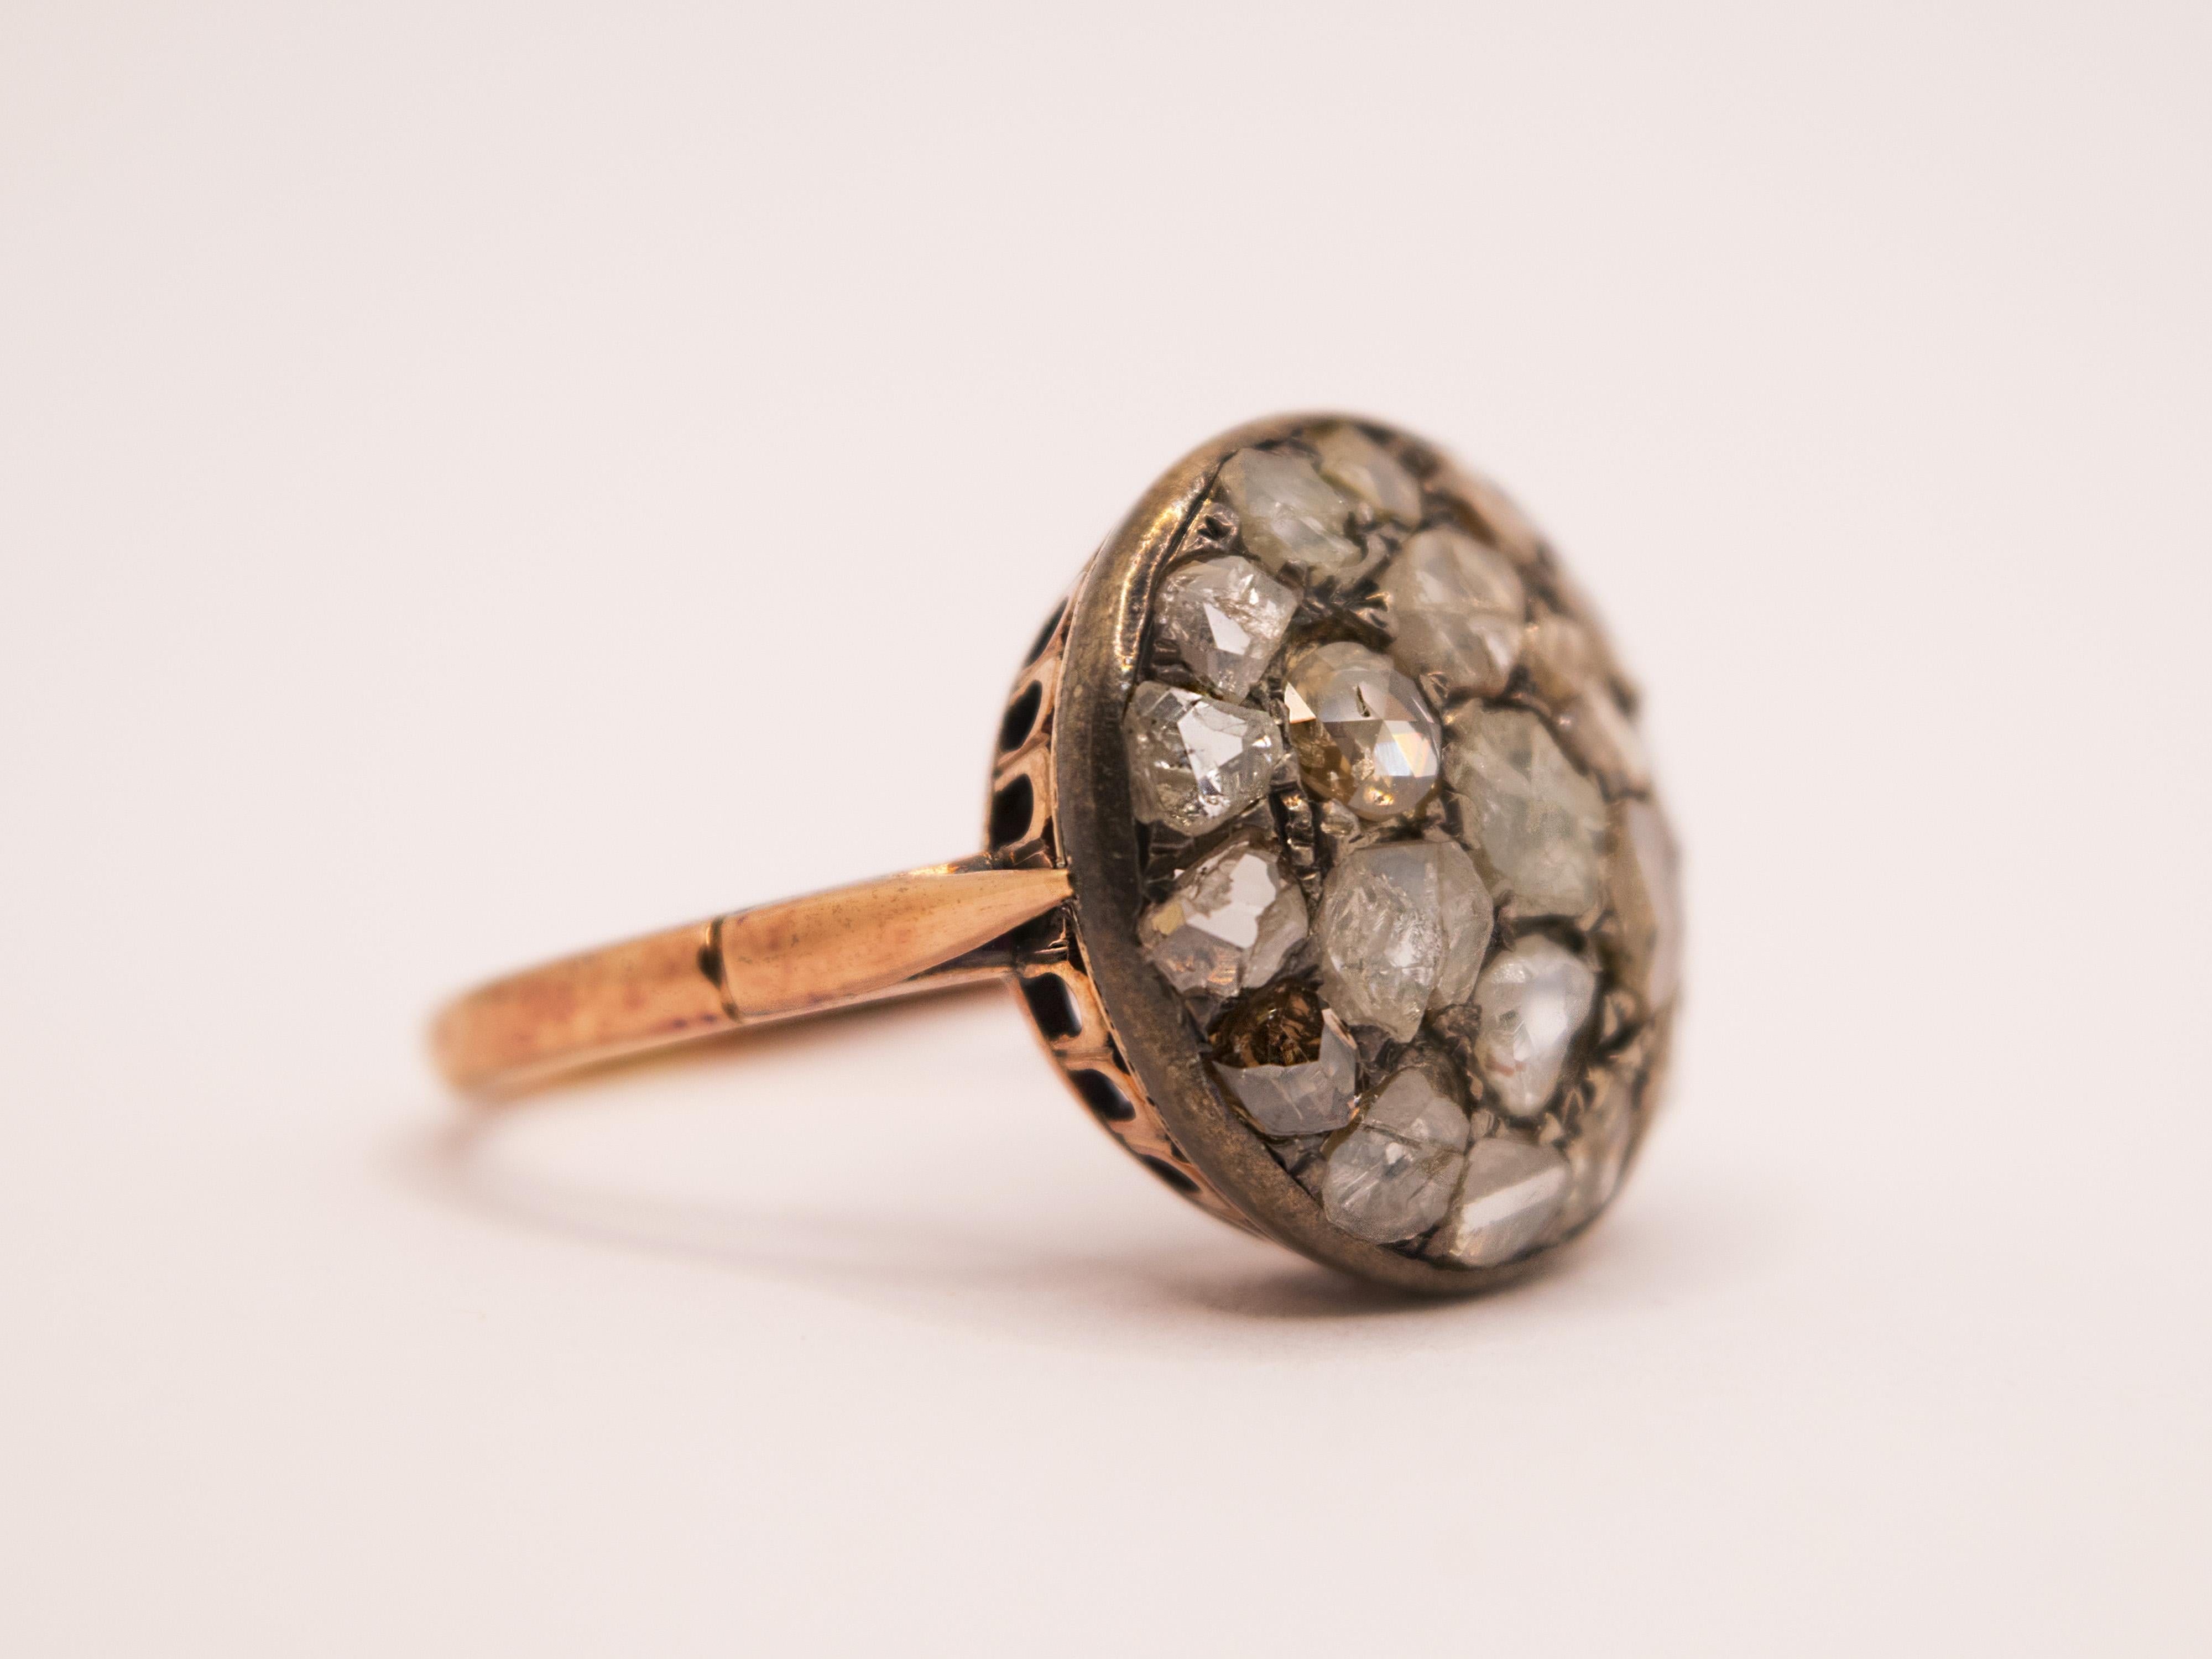 A beautiful original 1930s ring in 9 kt gold and Silver in the tops.
The total weight of this ring is 4.75 g.
It is embellished with a pave of antique-cut diamonds.
This ring is very representative of the 1930s era in both the combination of 'gold